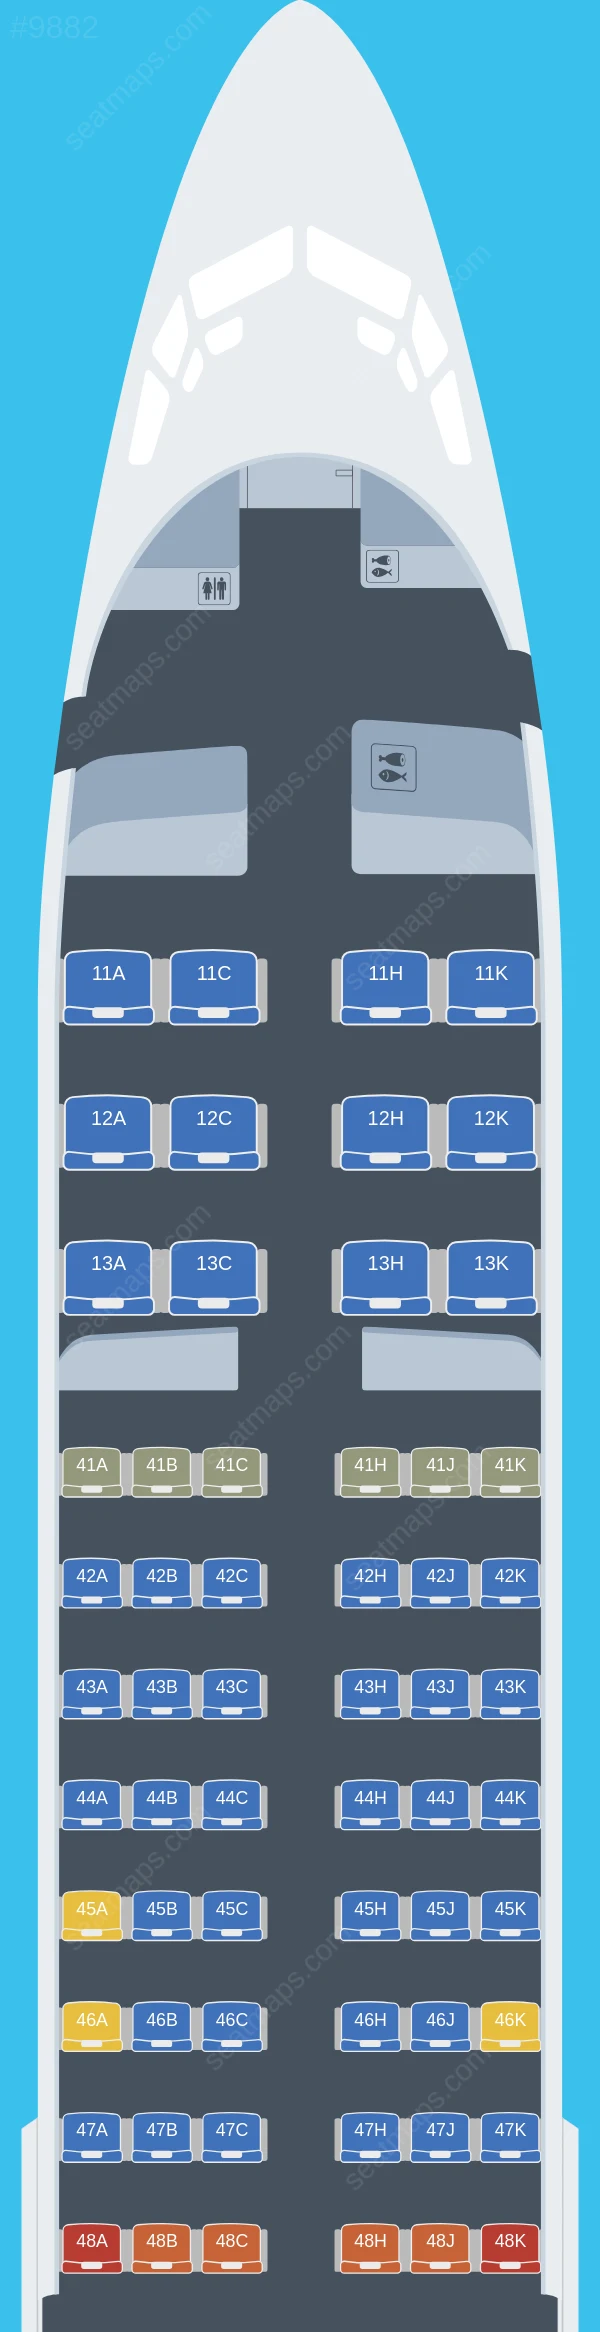 Singapore Airlines Boeing 737-800 seatmap preview